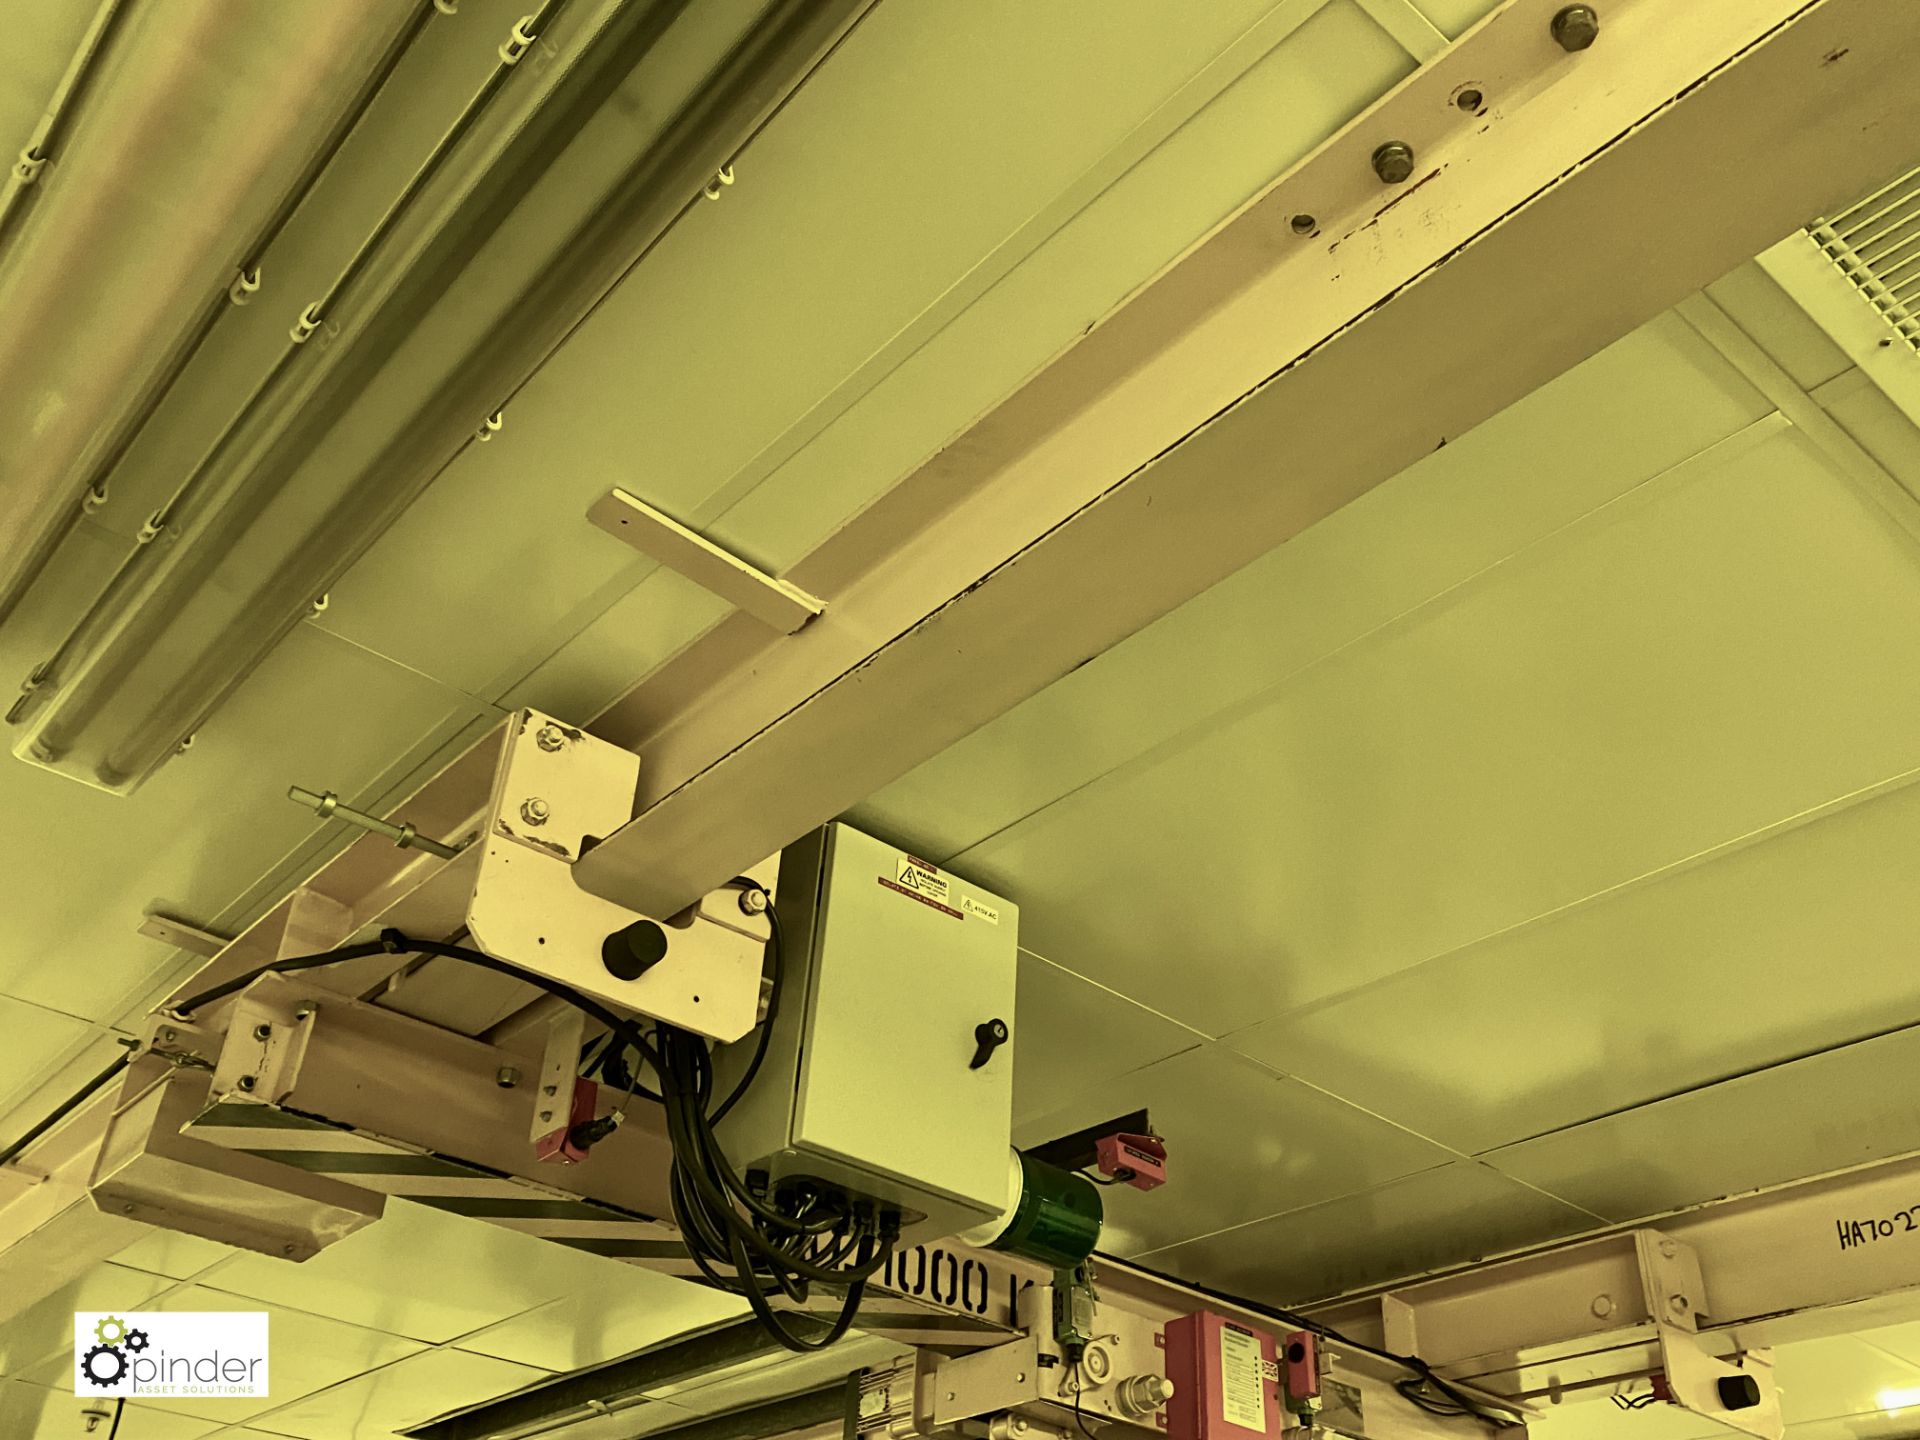 Suspended Overhead Travelling Crane Installation, - Image 2 of 9